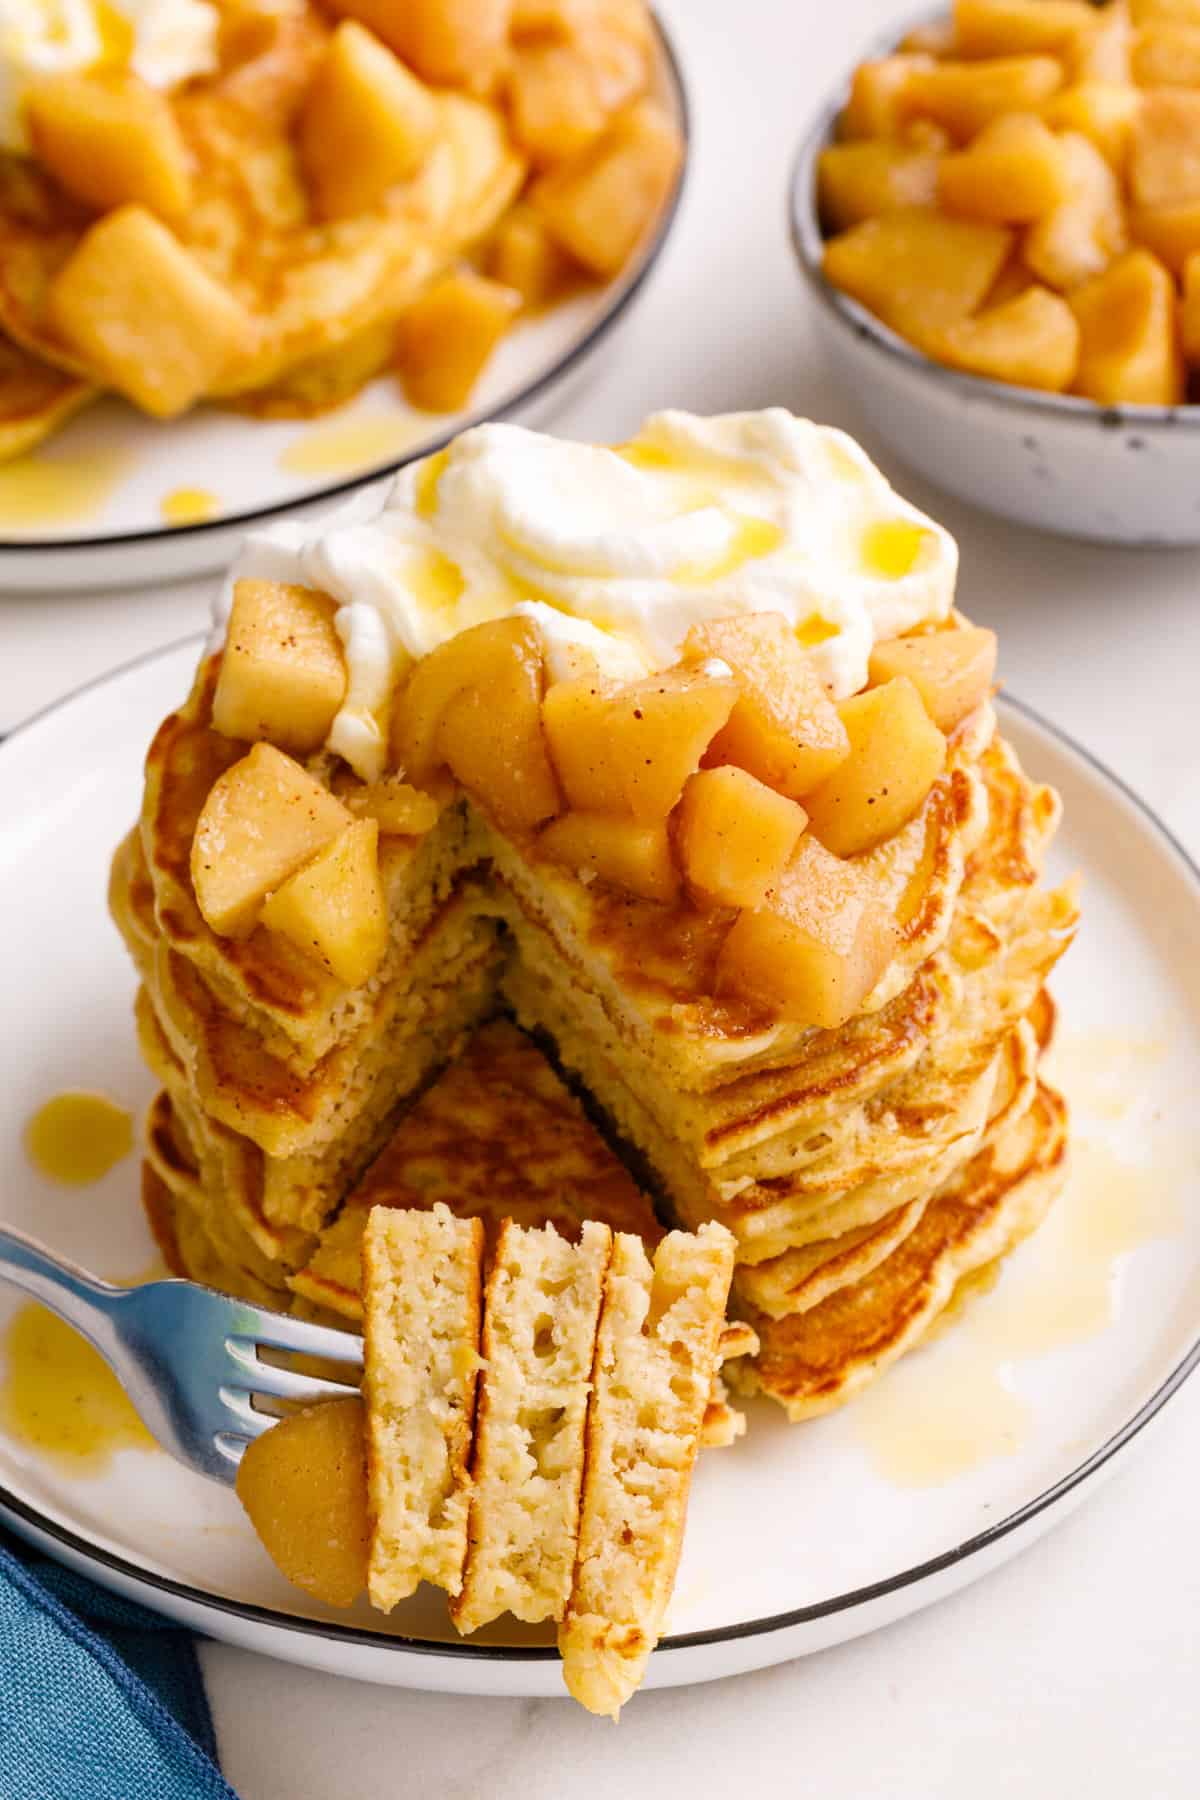 stack of four apple pancakes topped with fresh cooked granny smith apples, whipped cream and syrup with a slice taken out to show the cross section.